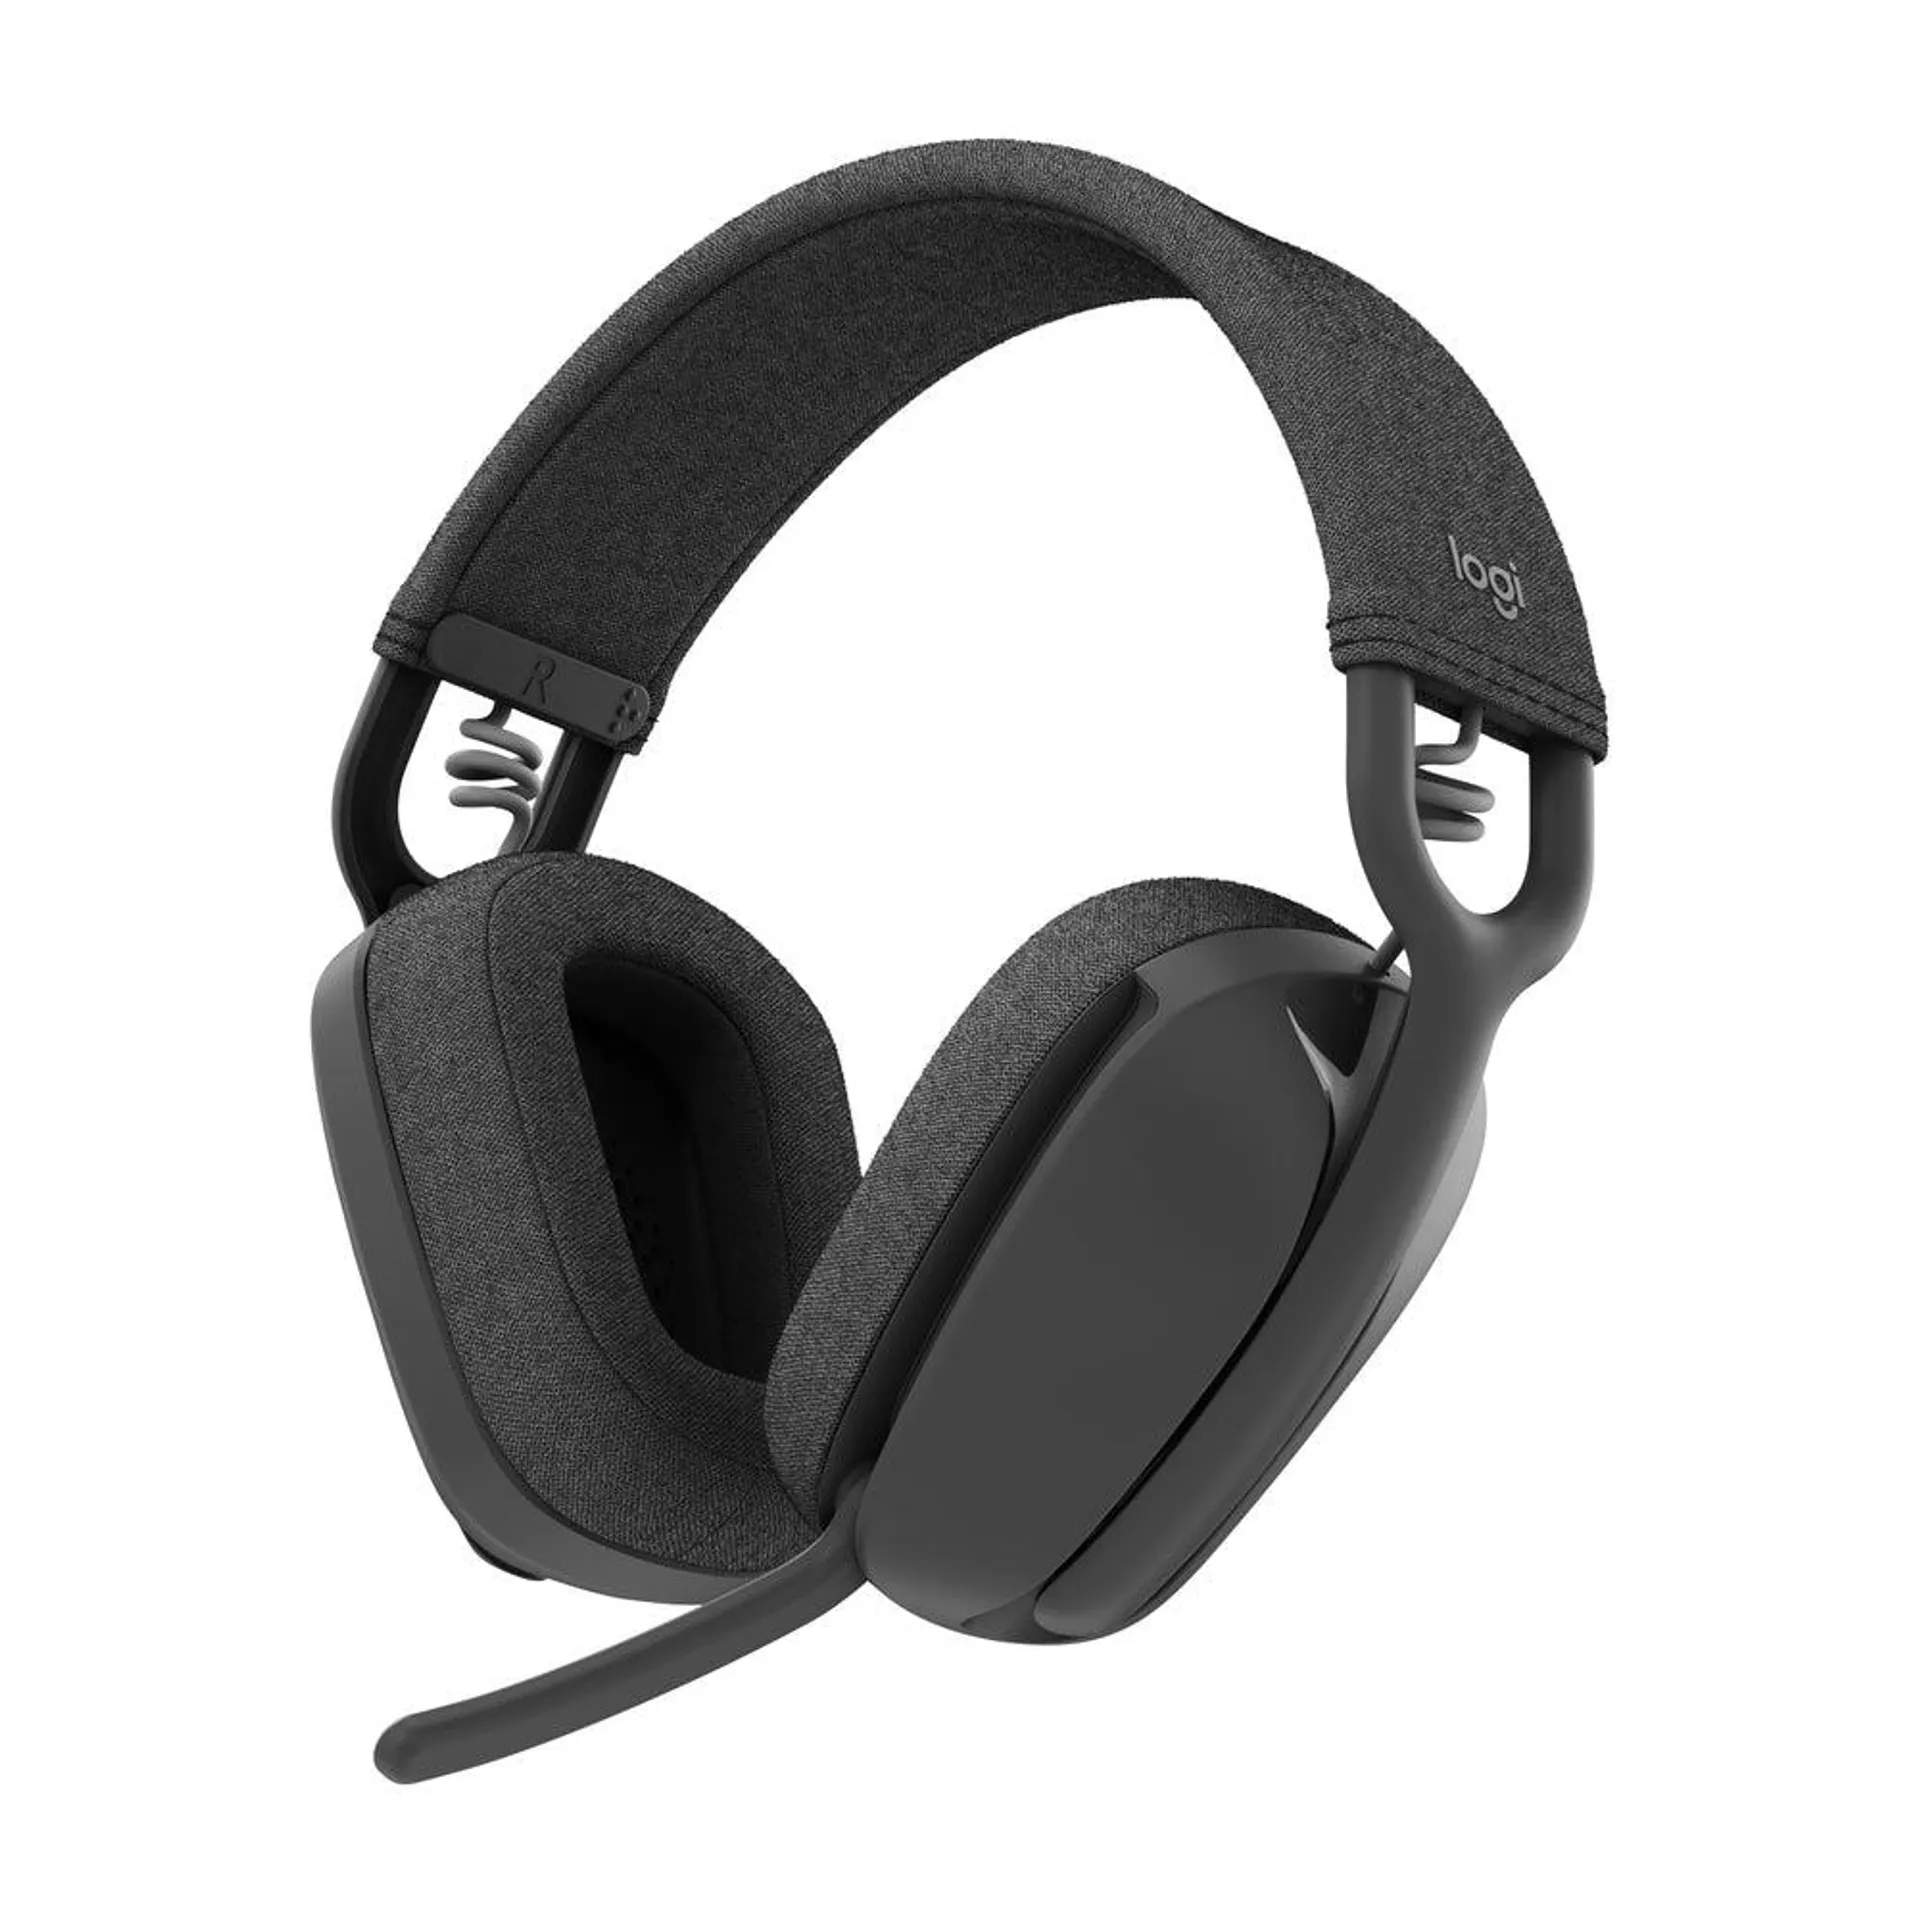 Logitech Zone Vibe 100 Lightweight Wireless Over Ear Headphones with Noise Canceling Microphone - Graphite